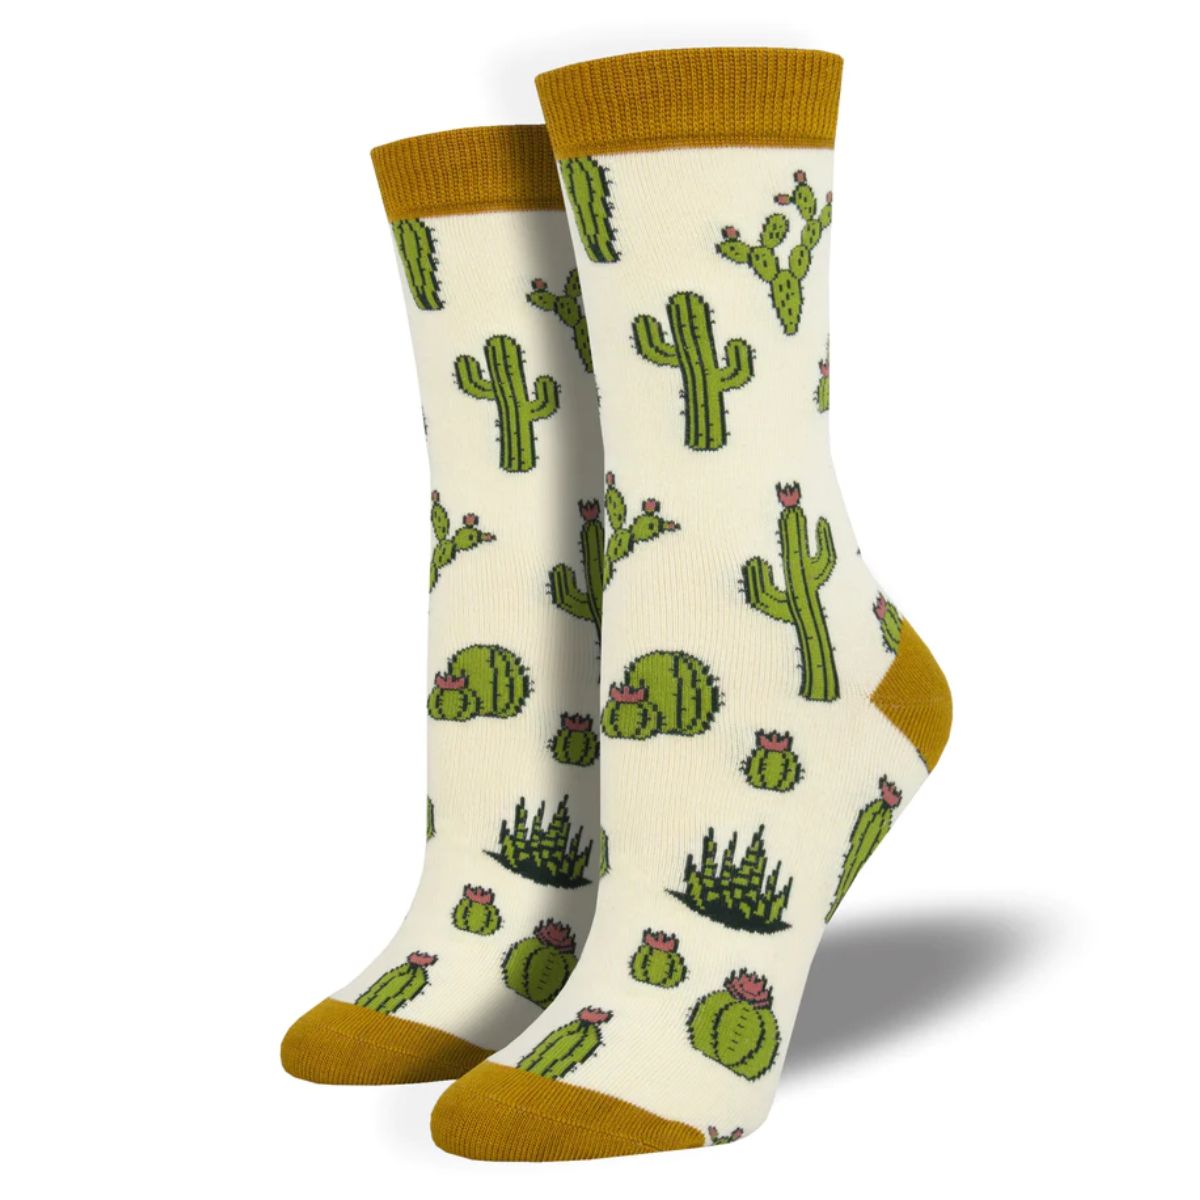 king cactus socks a pair of ivory white crew socks with cactus print